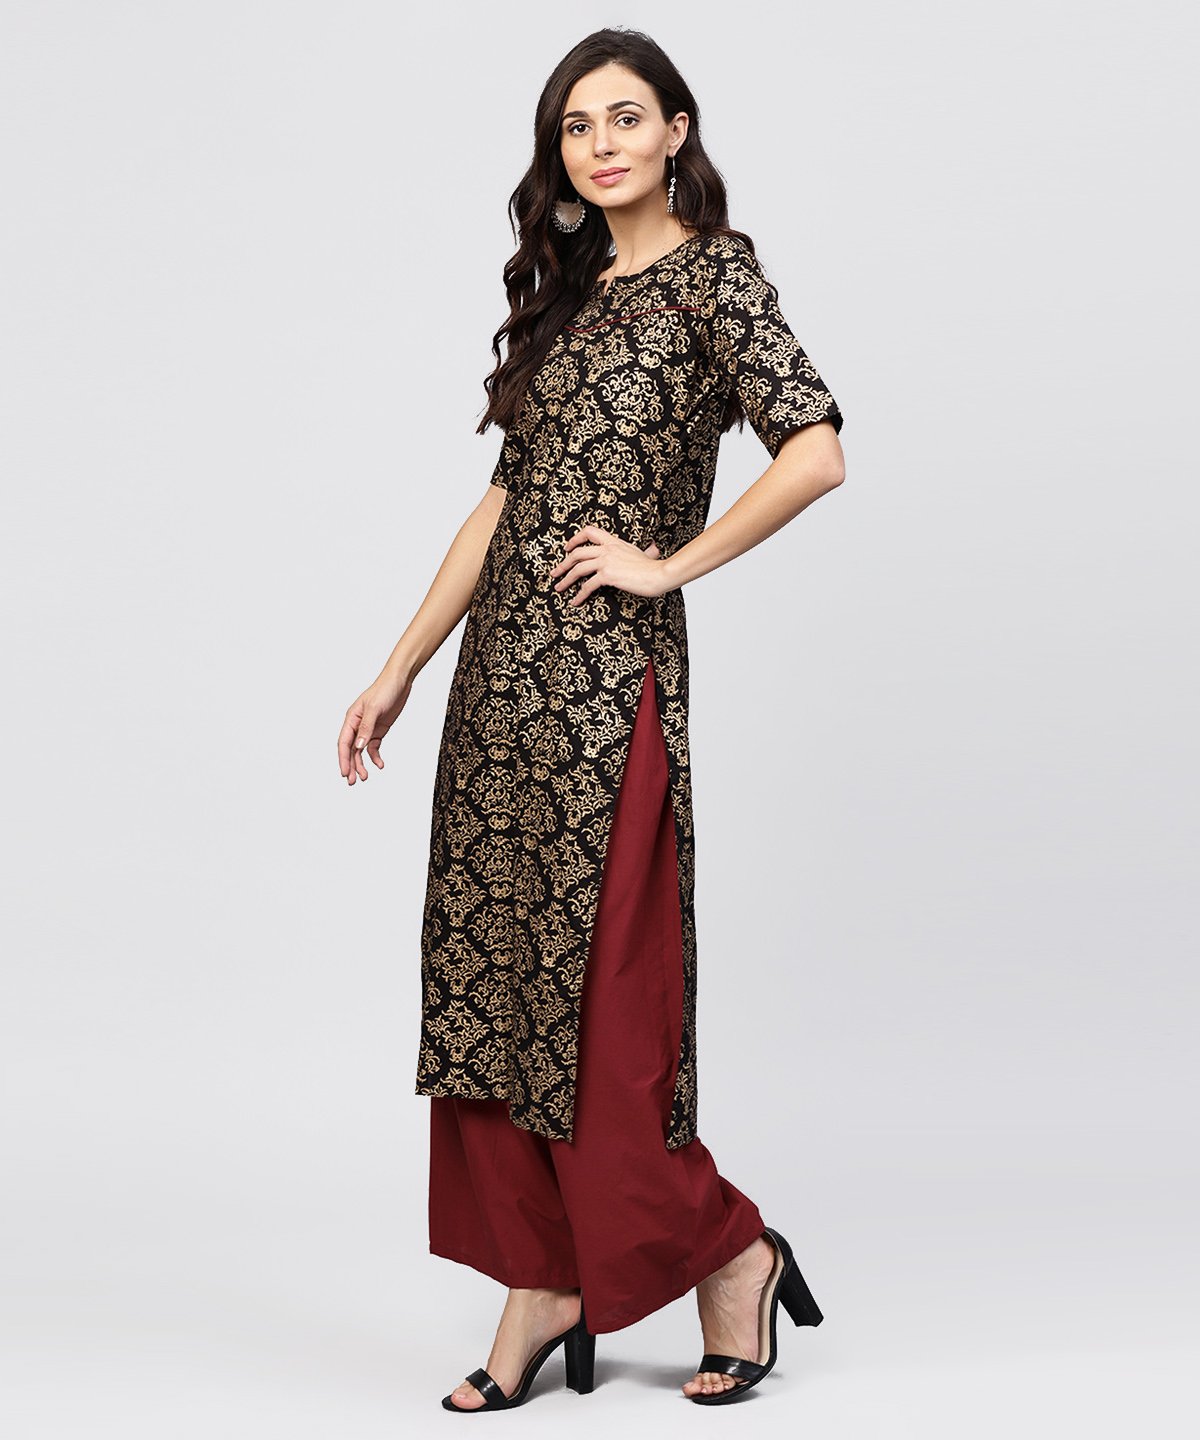 Women's Half Slevees Round Neck Cotton Printed Kurta With Ankle Length Palazzo - Nayo Clothing